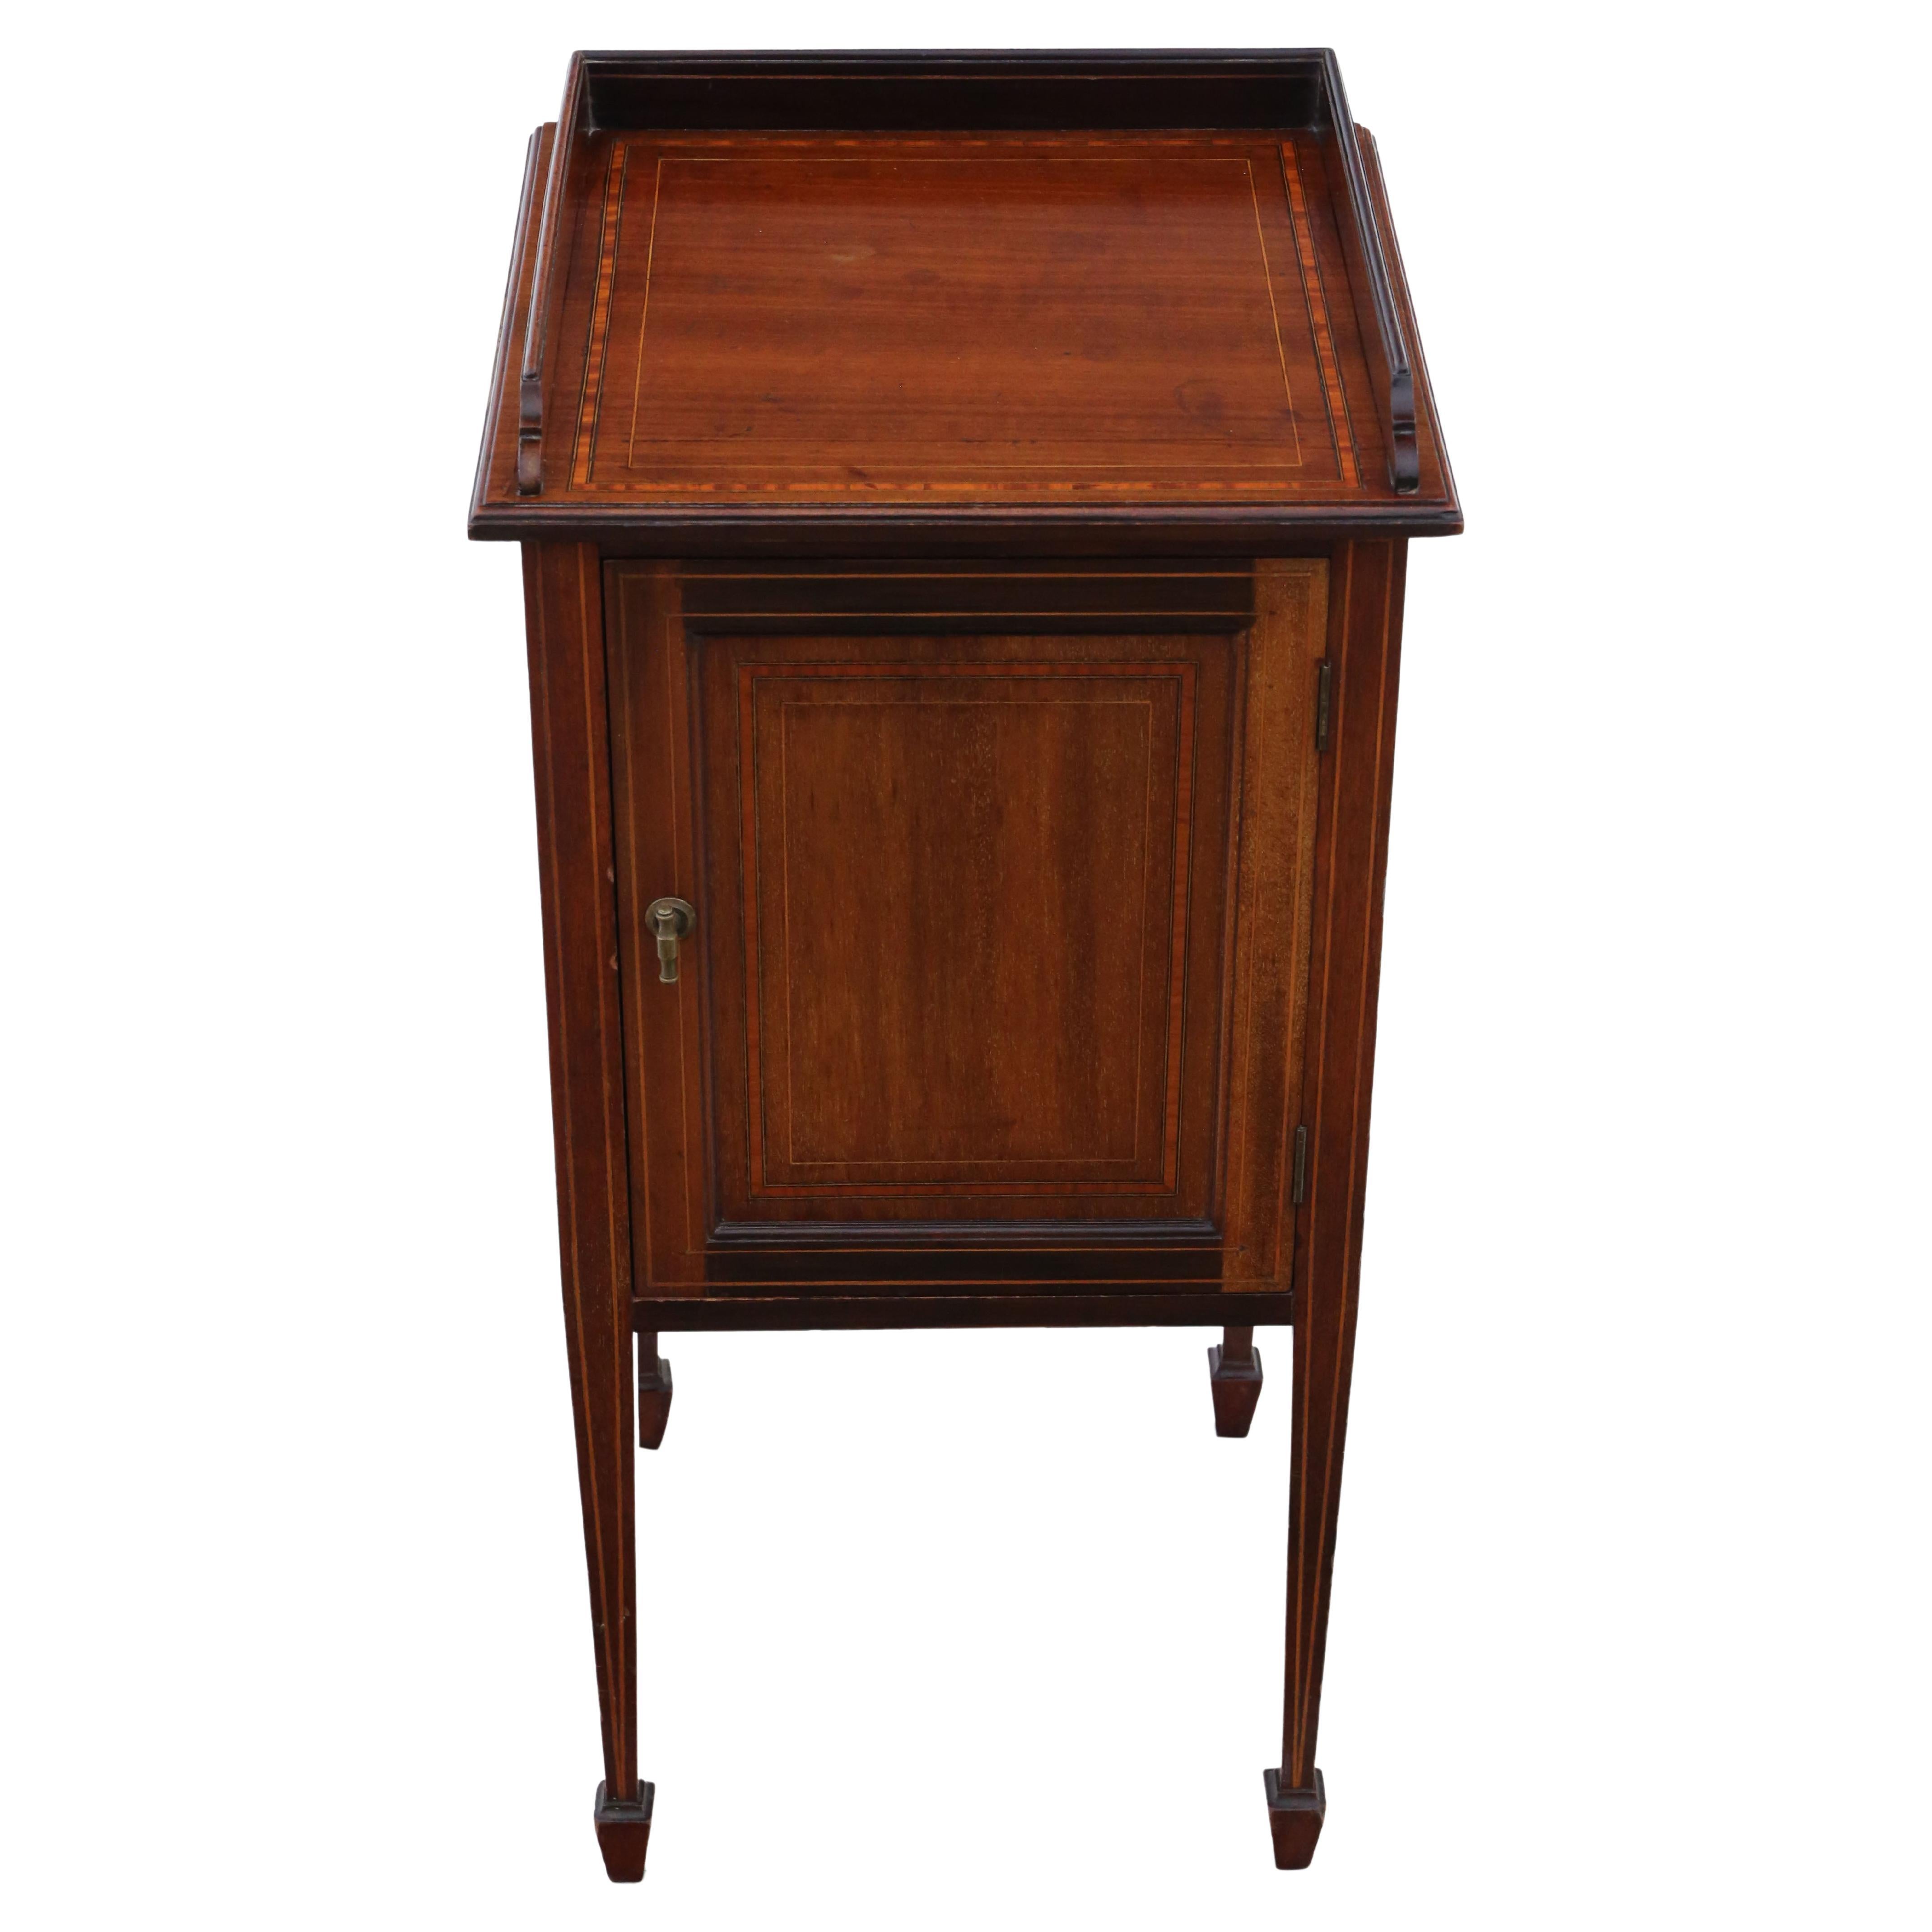 Antique Fine Quality Tray Top Inlaid Mahogany Bedside Table Cupboard For Sale